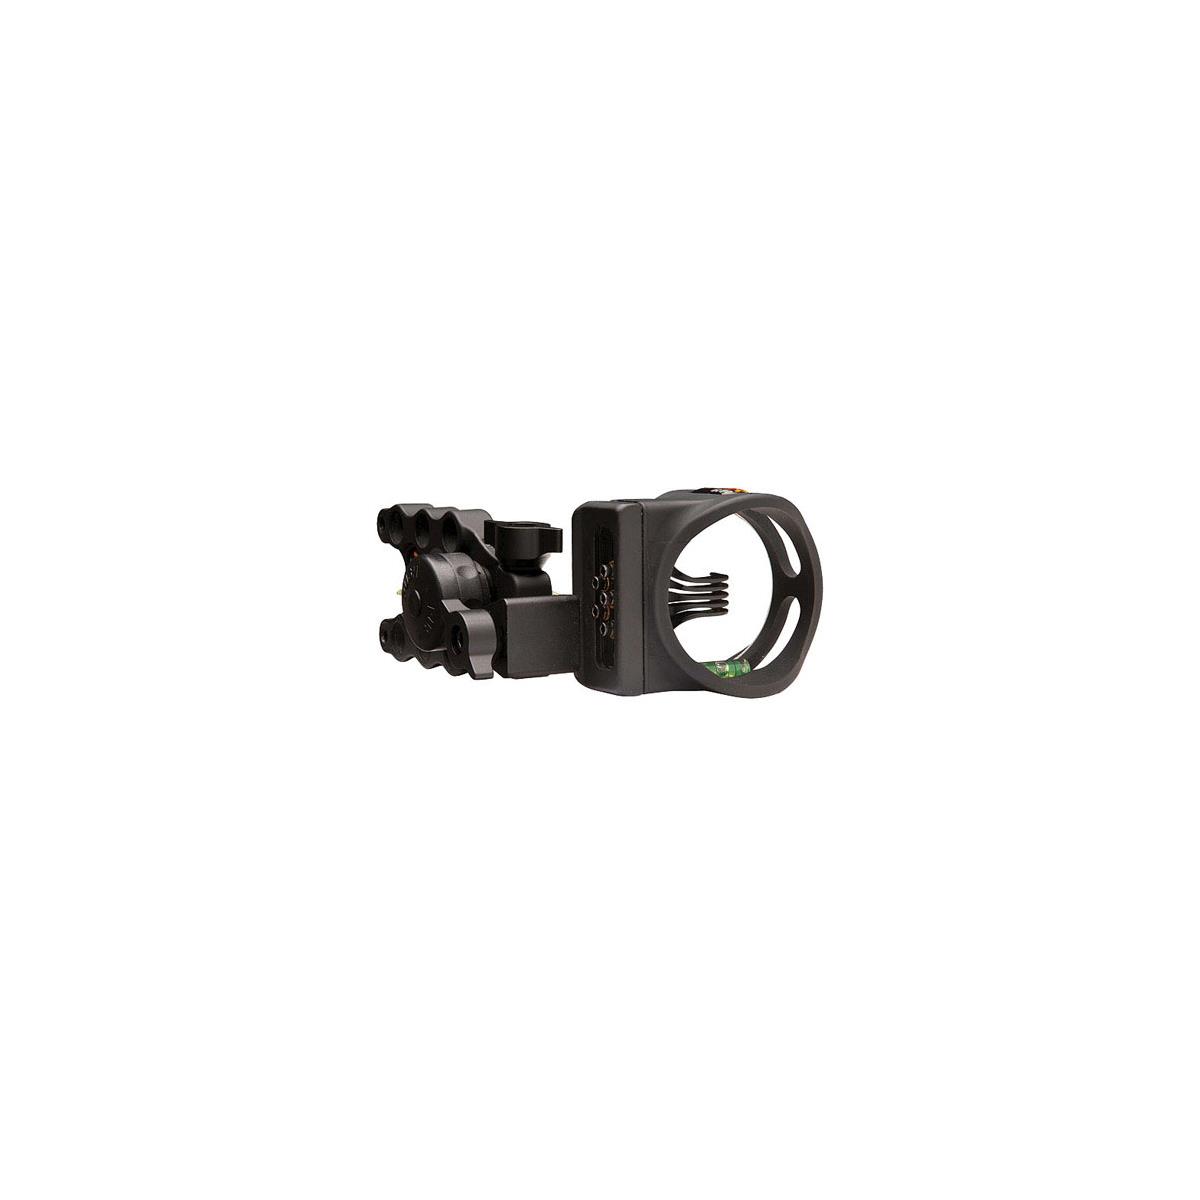 Image of Apex Gear Accu-Strike Pro 5 Select 5-Pin Bow Sight